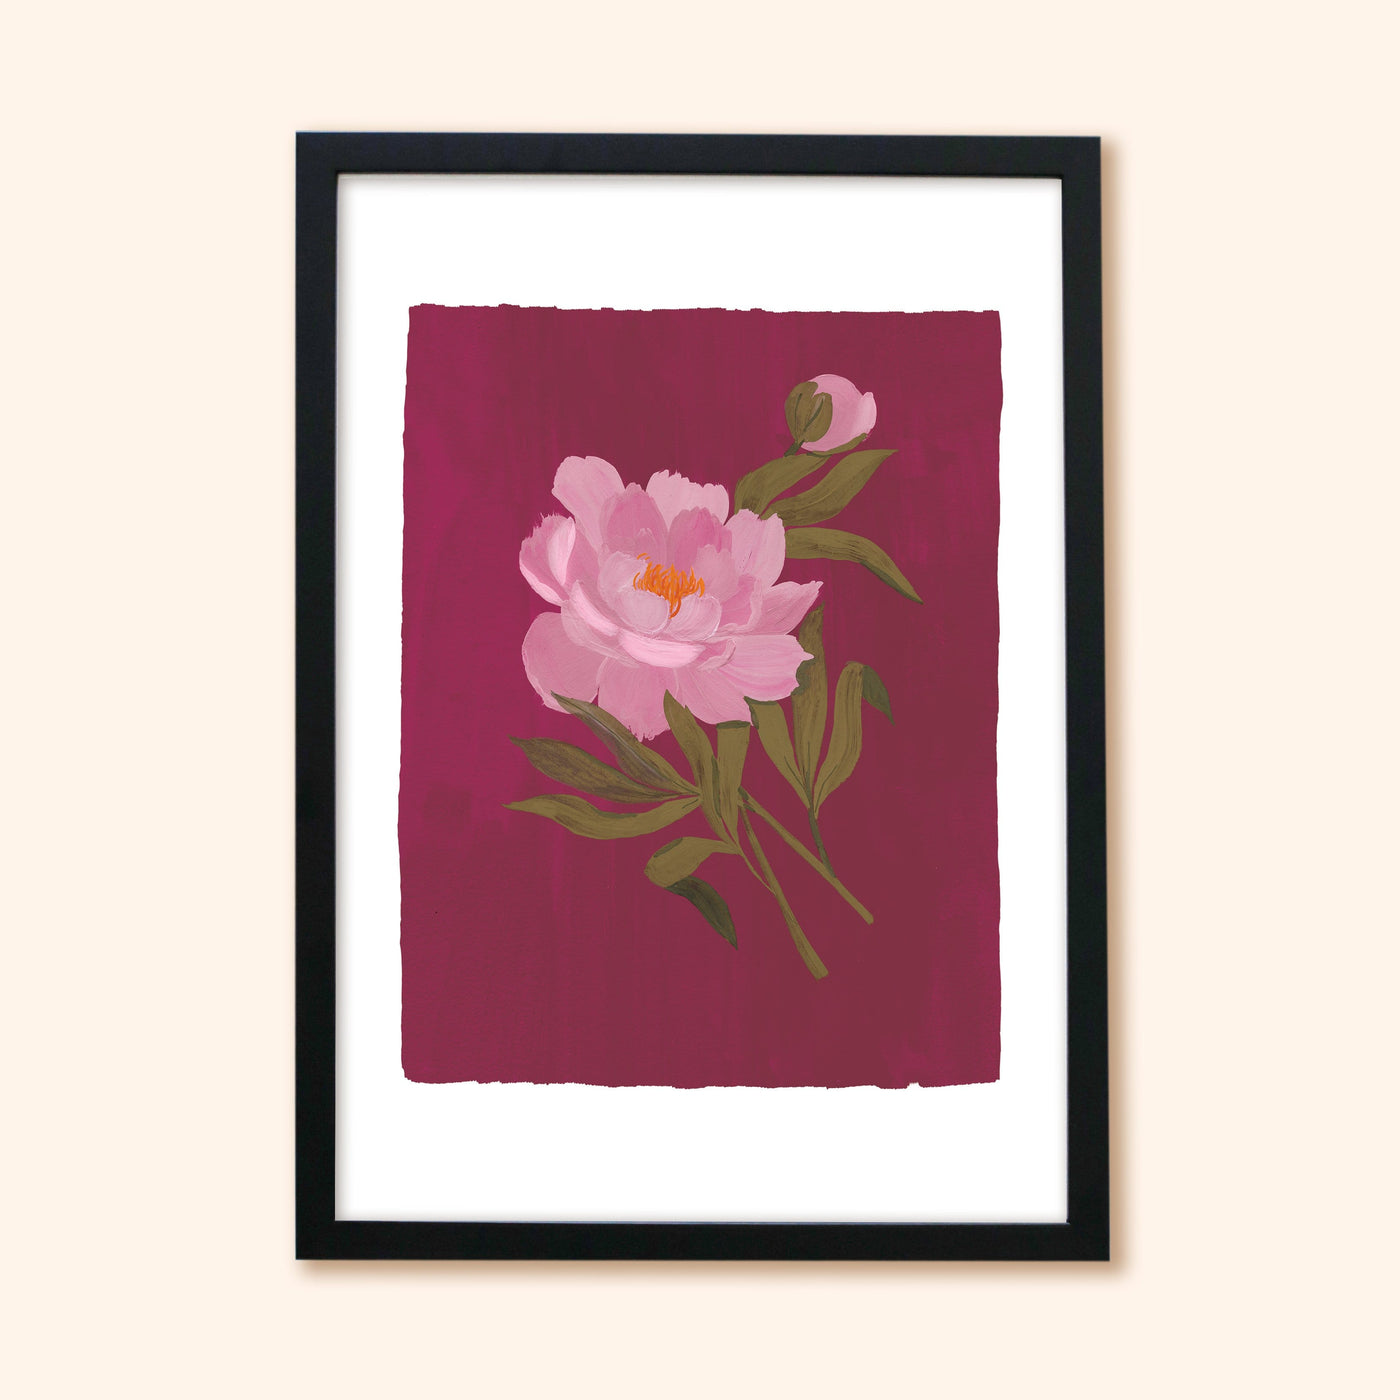 A Botanical Print Of A Pink Peony On A Burgundy Pink Background In A Black Frame - Annie Dornan Smith